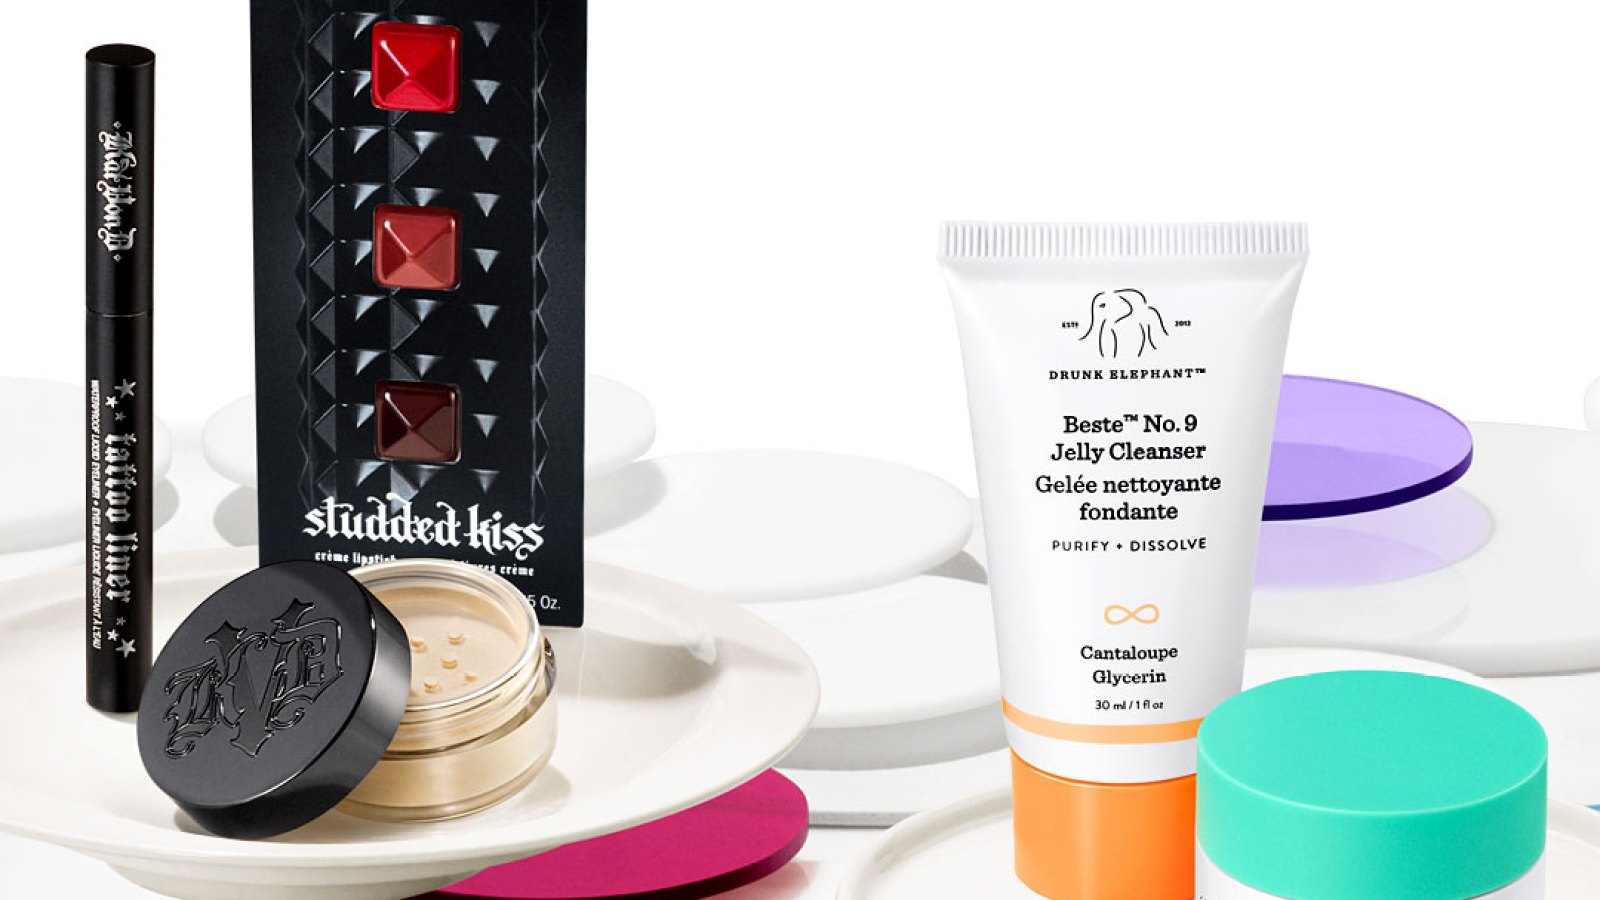 Sephora Just Unveiled Its 2019 Birthday Gifts